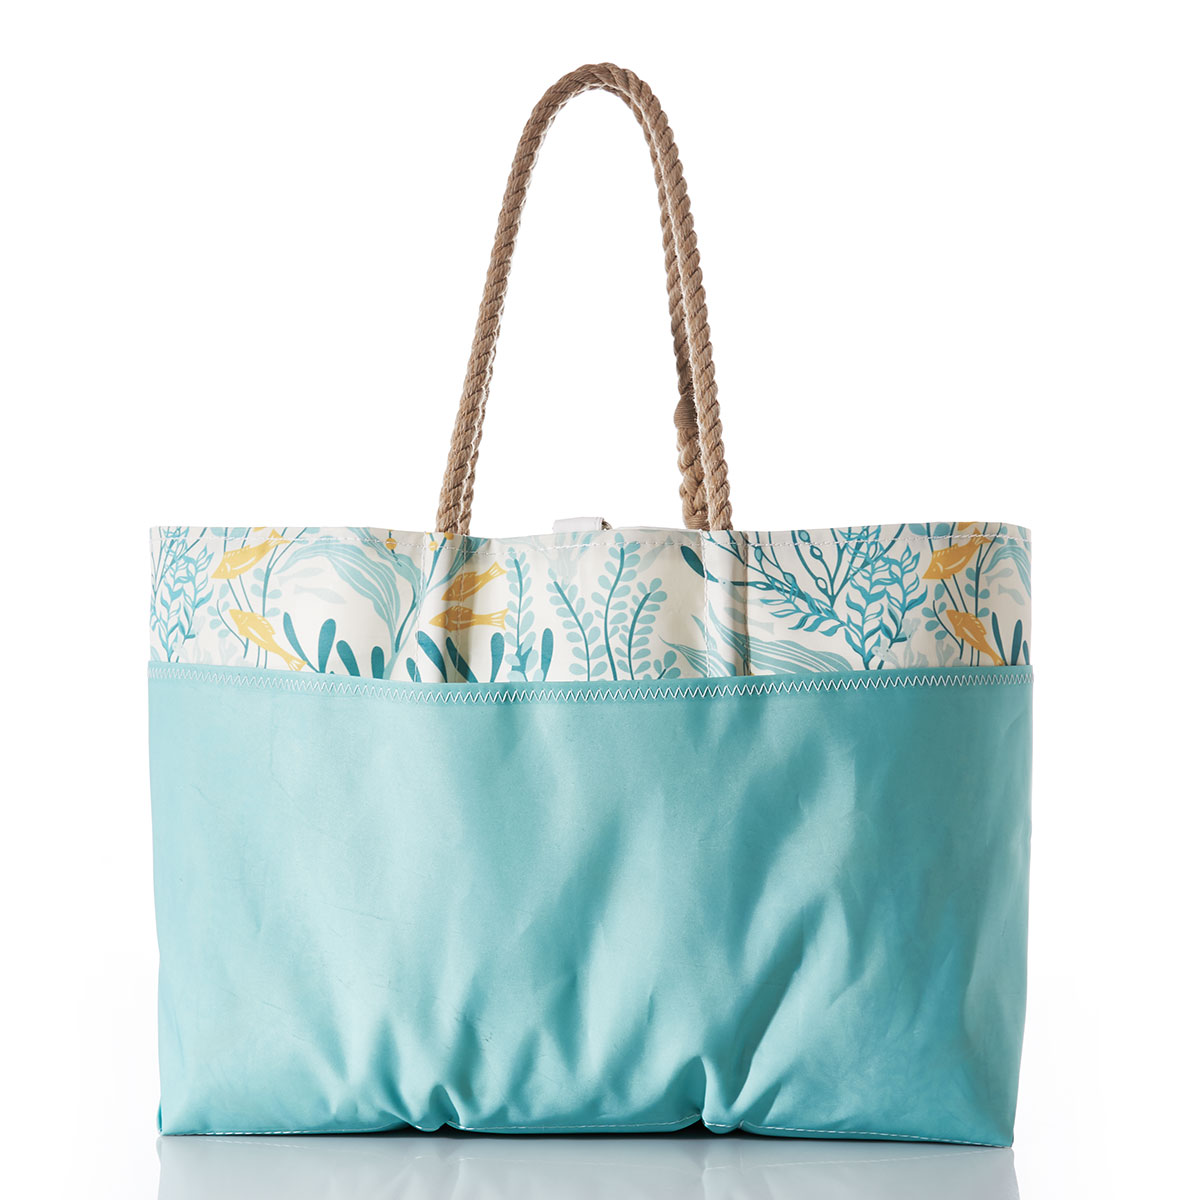 back view showing seafoam green outer pocket: little yellow fish swim among various types of seaweed in shades of blue on a white recycled sail cloth tote with a seafoam green covering the bottom of the bag